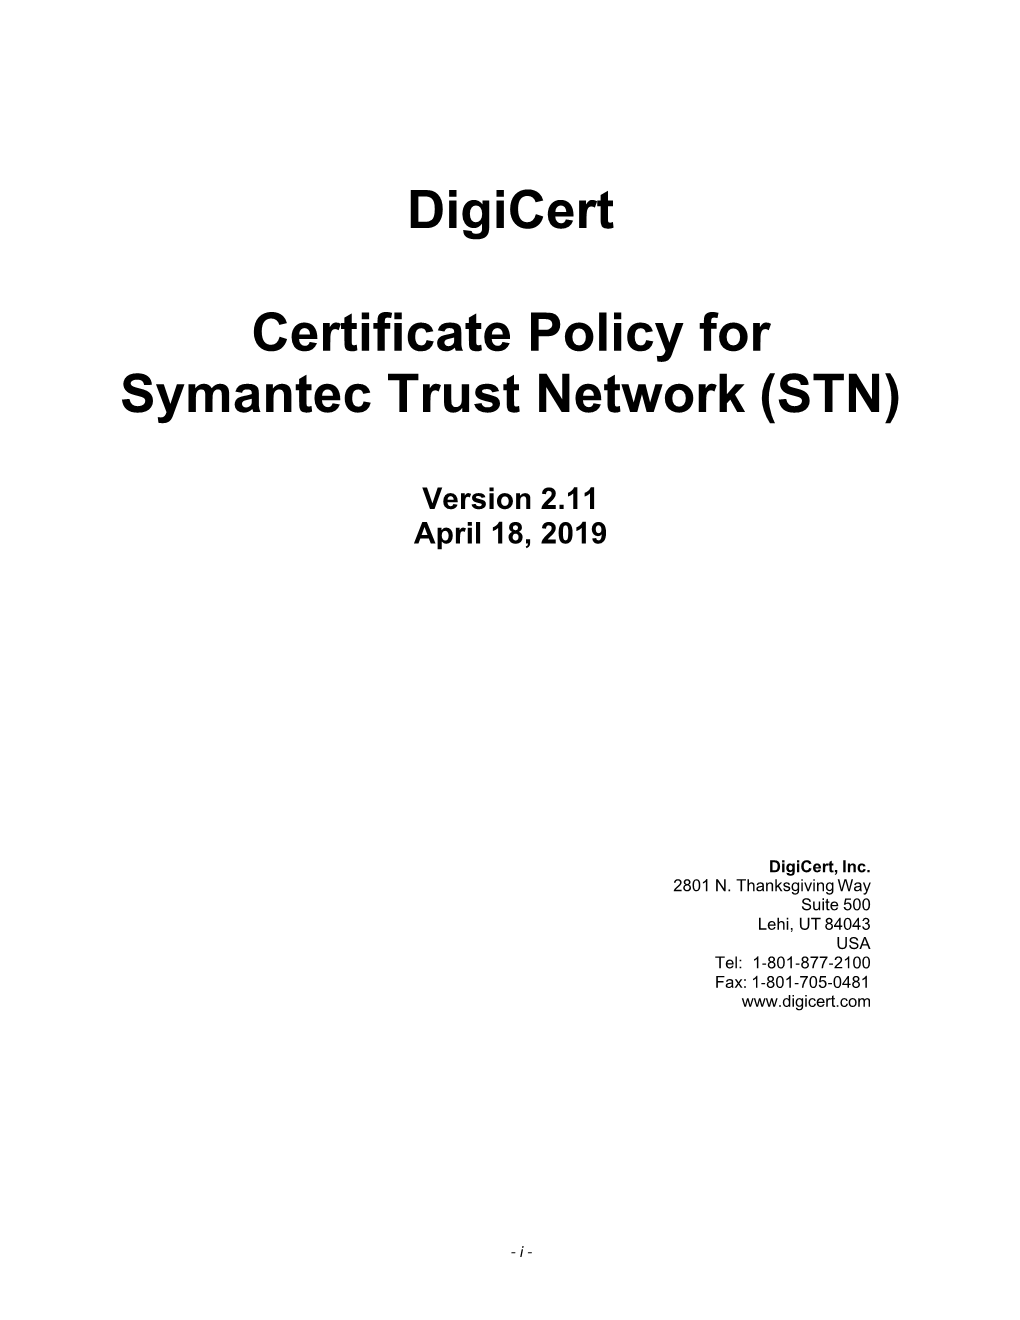 Digicert Certificate Policy for Symantec Trust Network (STN)